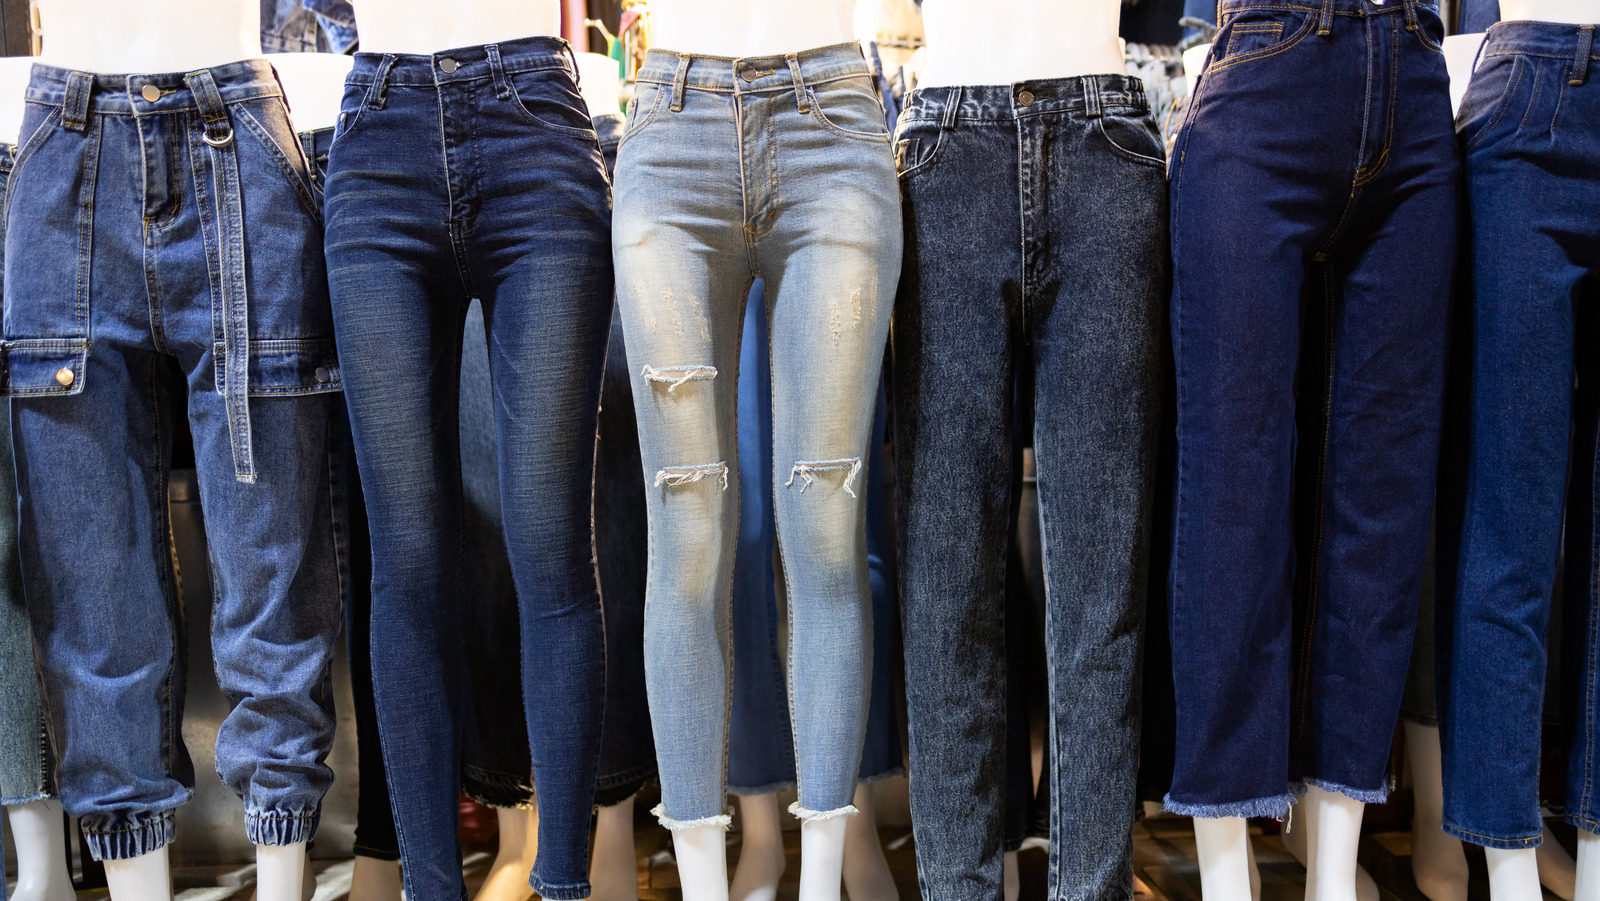 The Hottest New Trend Replacing Skinny Jeans Is Not What You'd Expect